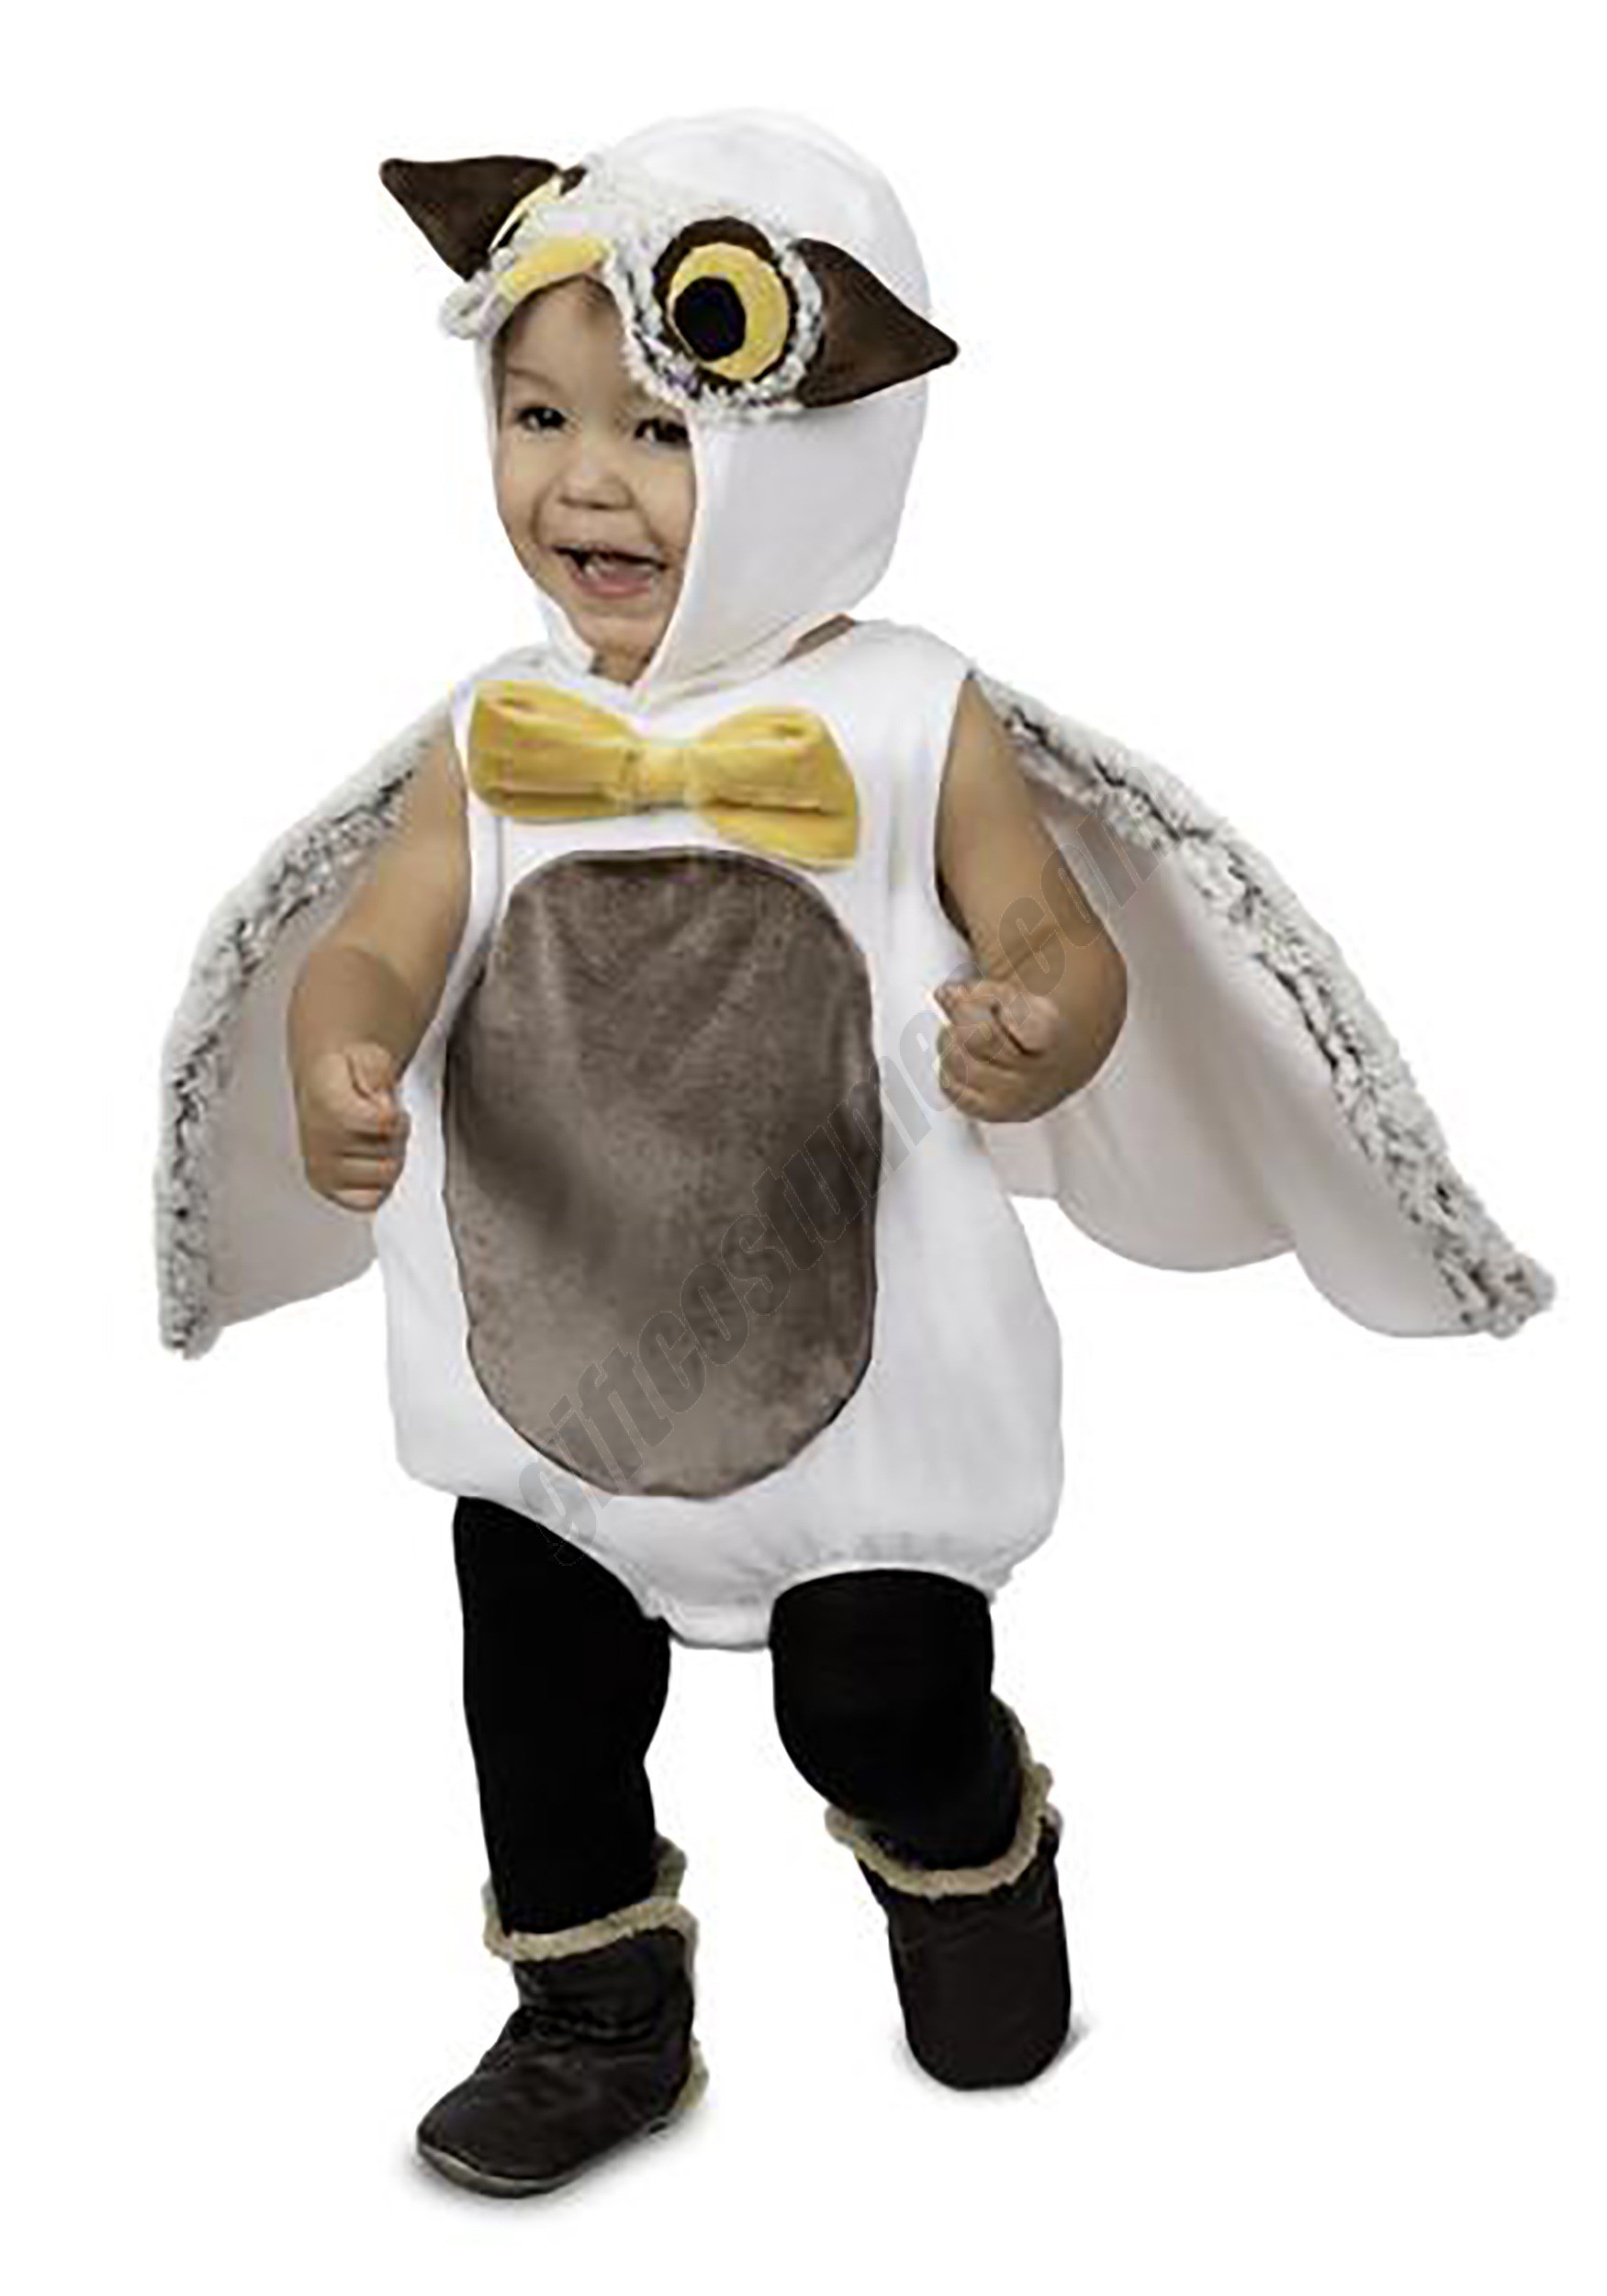 Otis the Owl Costume for Toddlers Promotions - Otis the Owl Costume for Toddlers Promotions